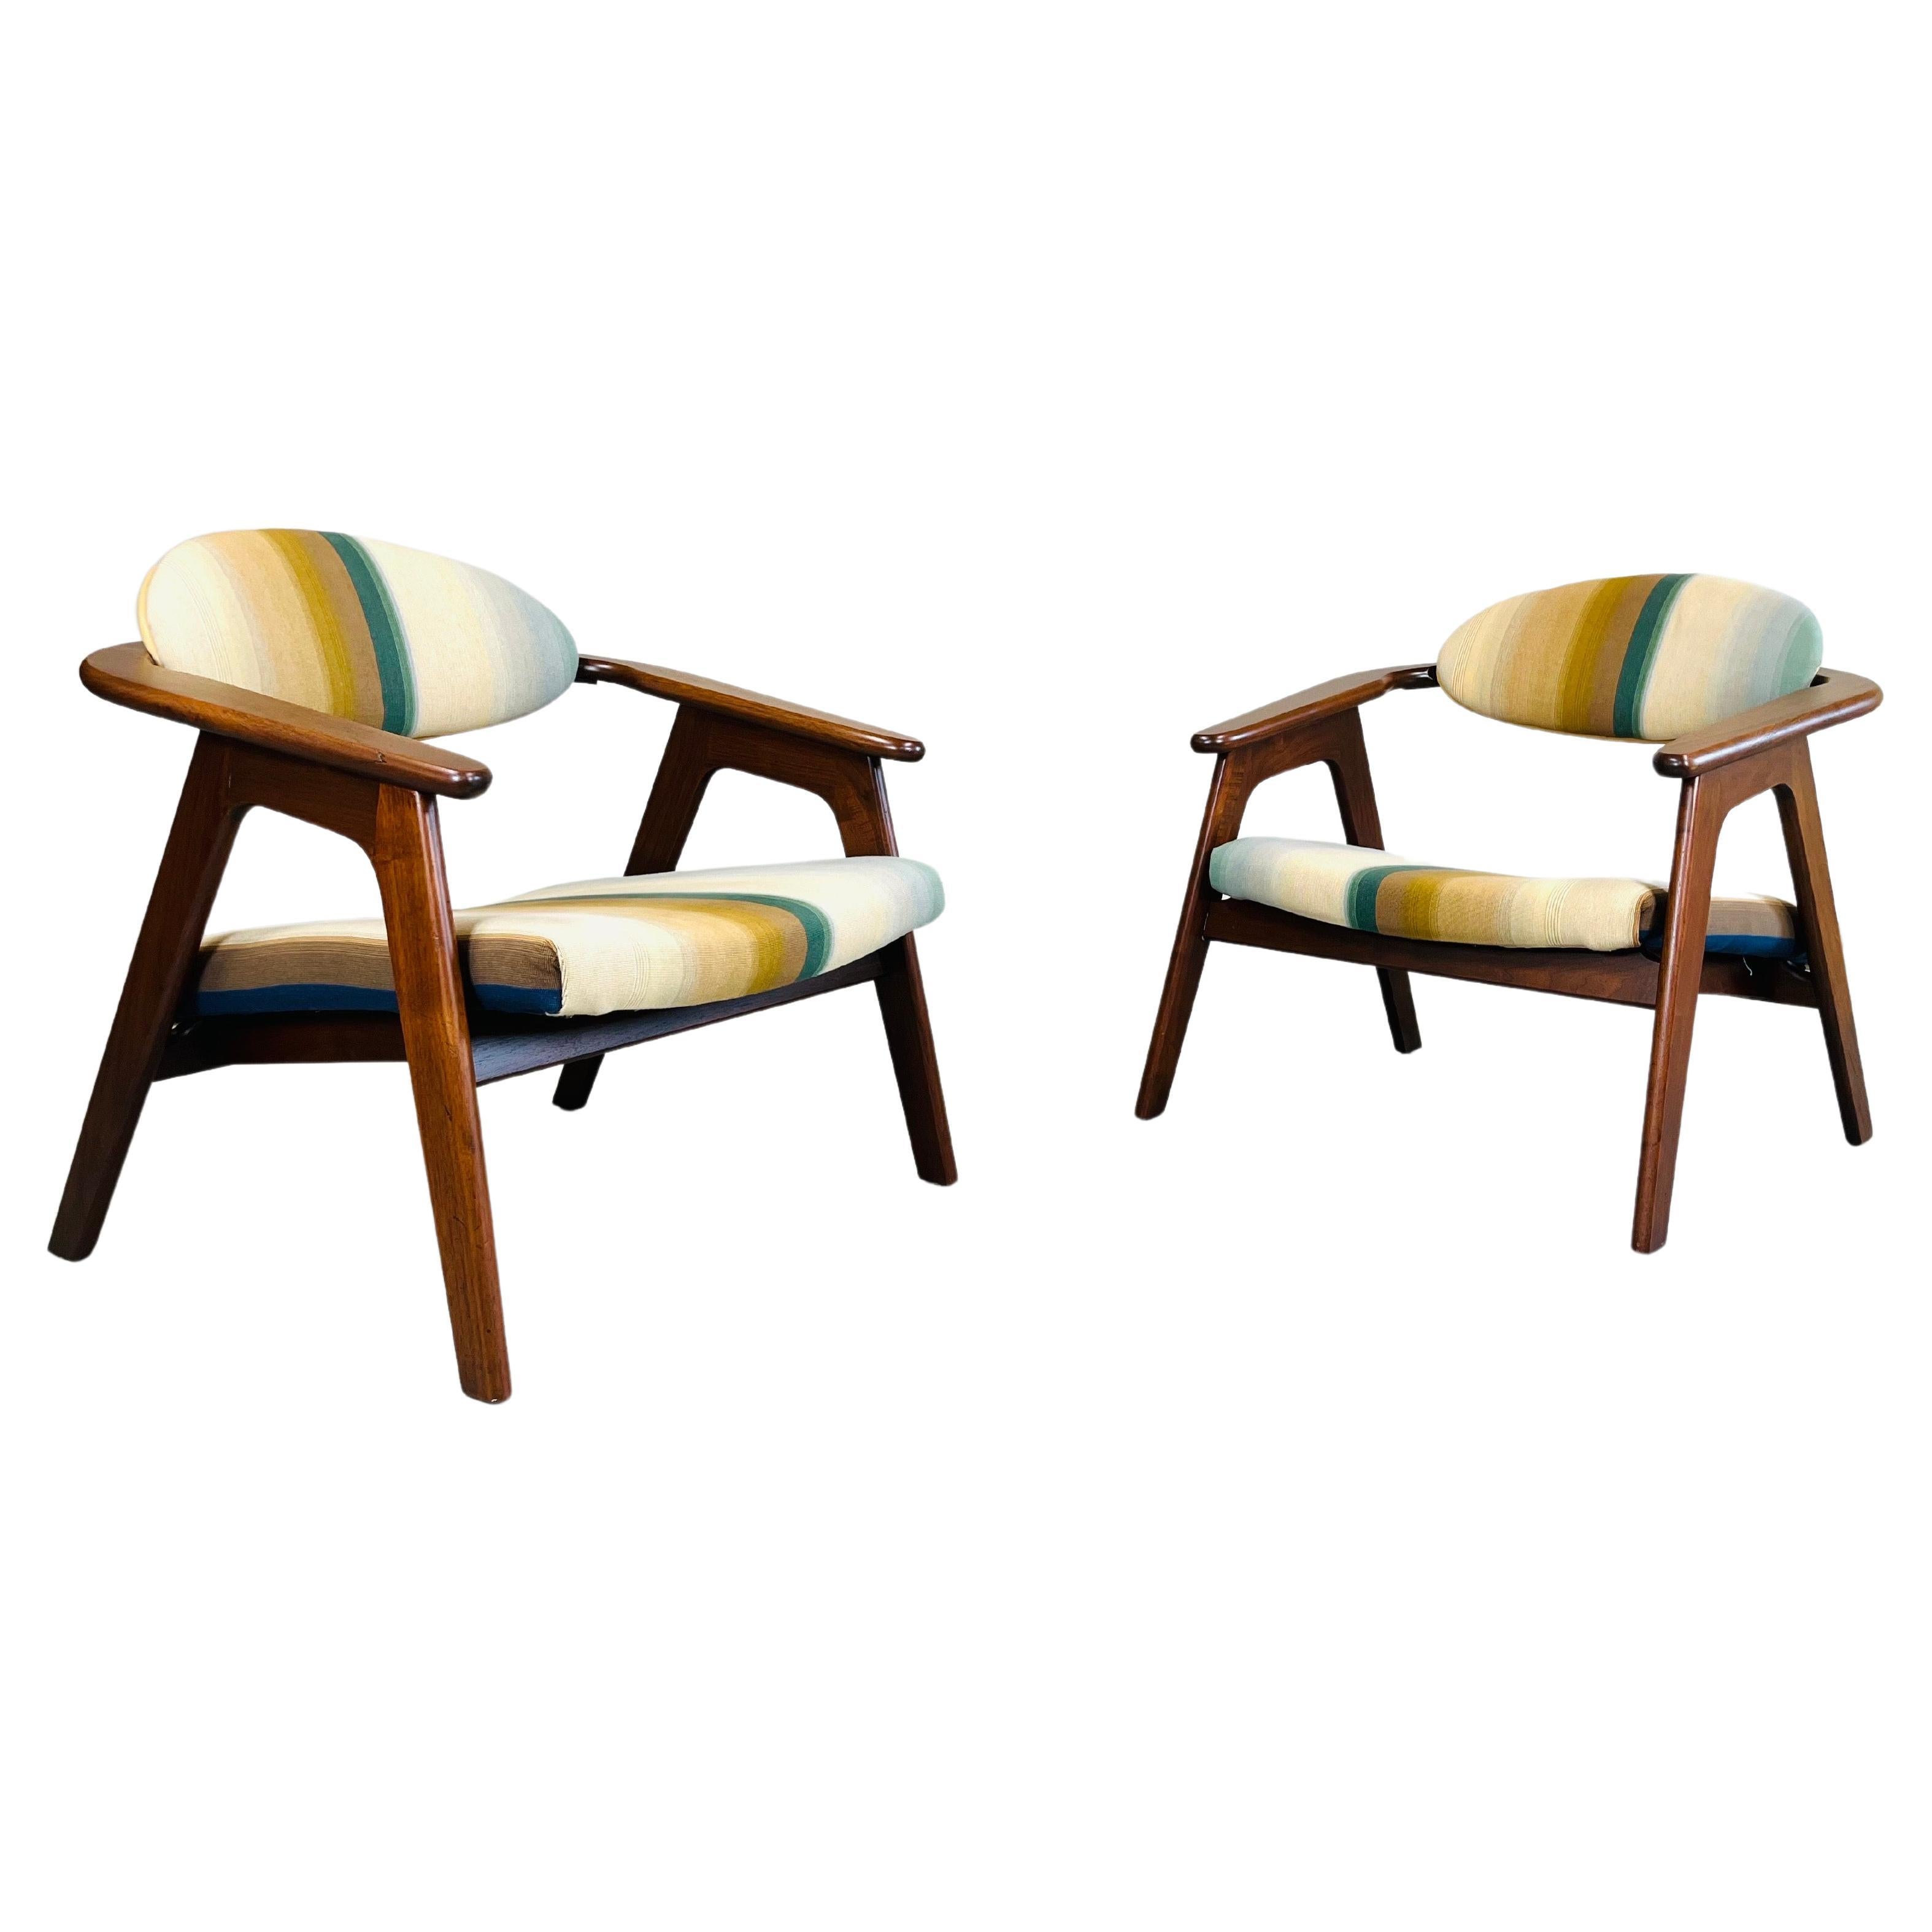 Vintage Sculptural Walnut Pair Of Adrian Pearsall ‘Captains’ Chairs 